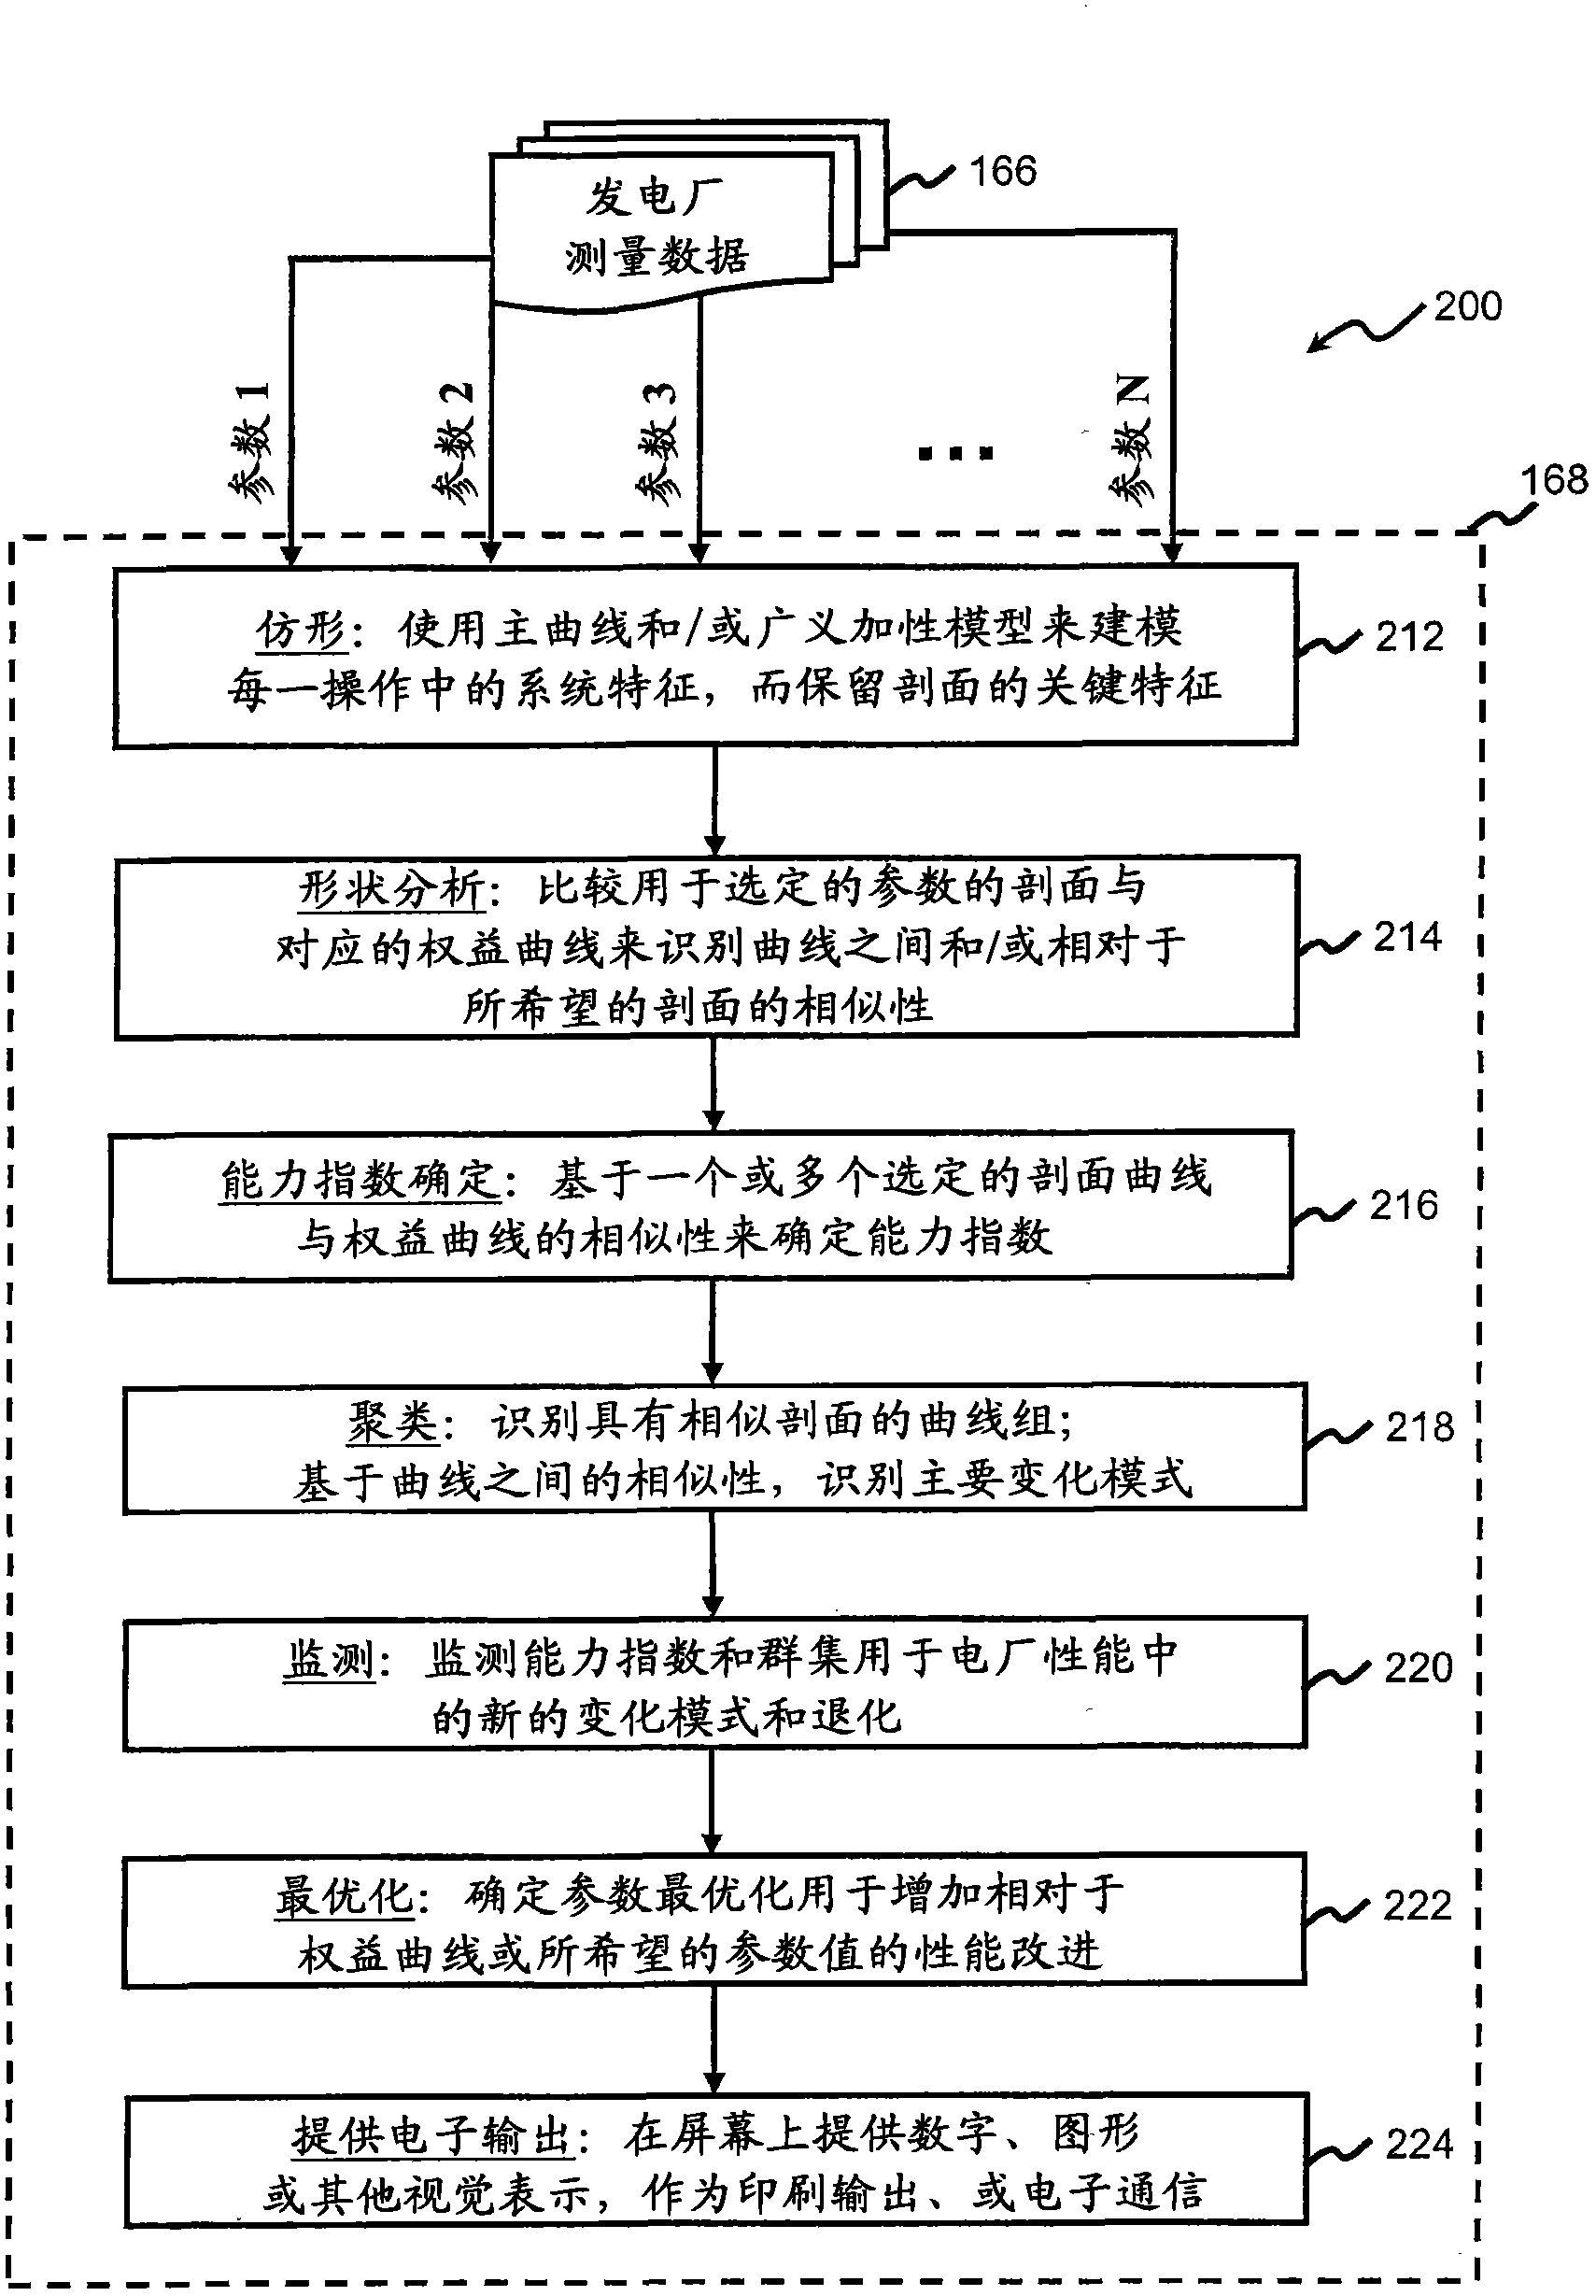 Automated system and method for implementing statistical comparison of power plant operations